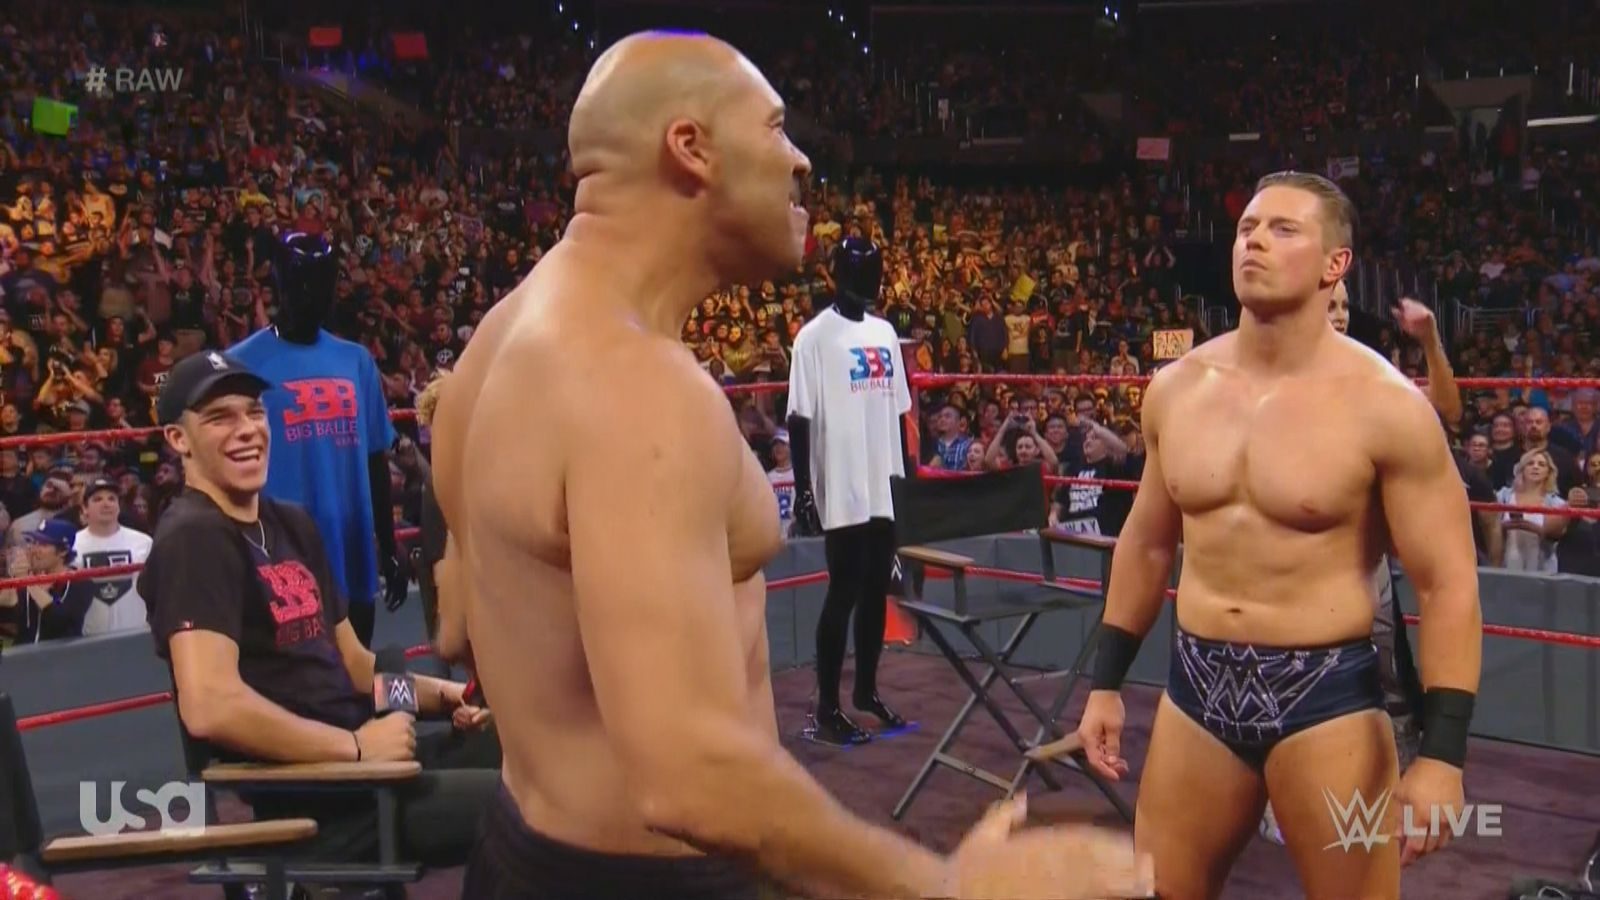 Ball brothers guest at WWE Raw, LaVar steals show